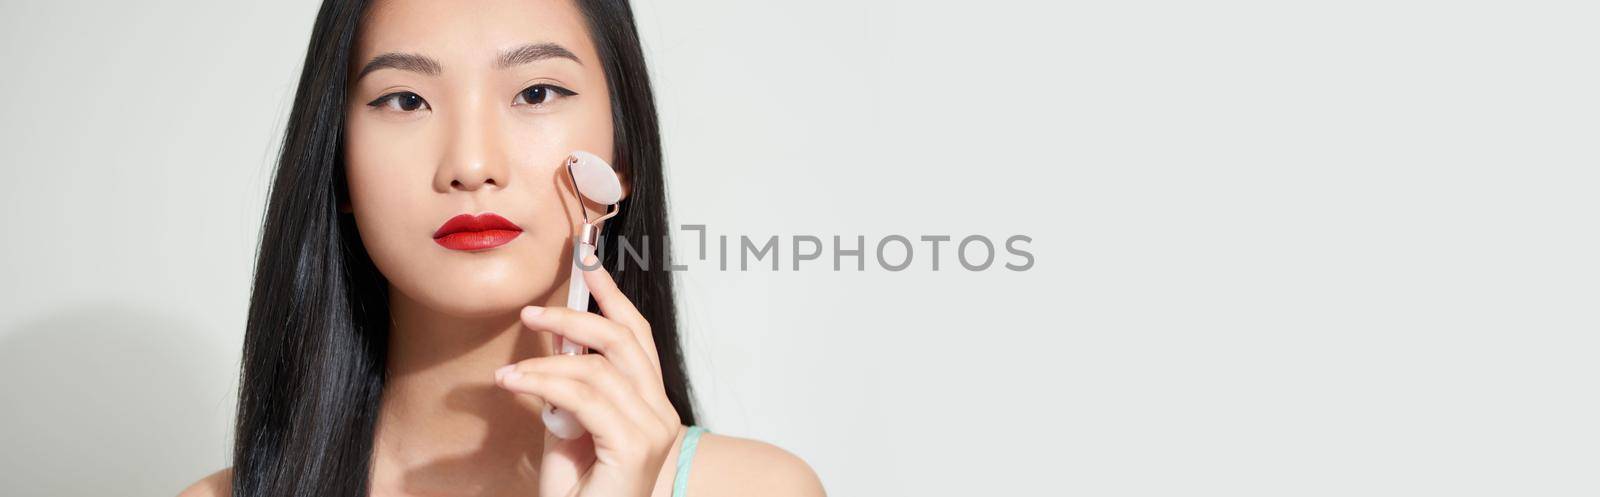 Face massage. Smiling woman using rose quartz facial roller for skin care, beauty treatment on white isolate background. by makidotvn